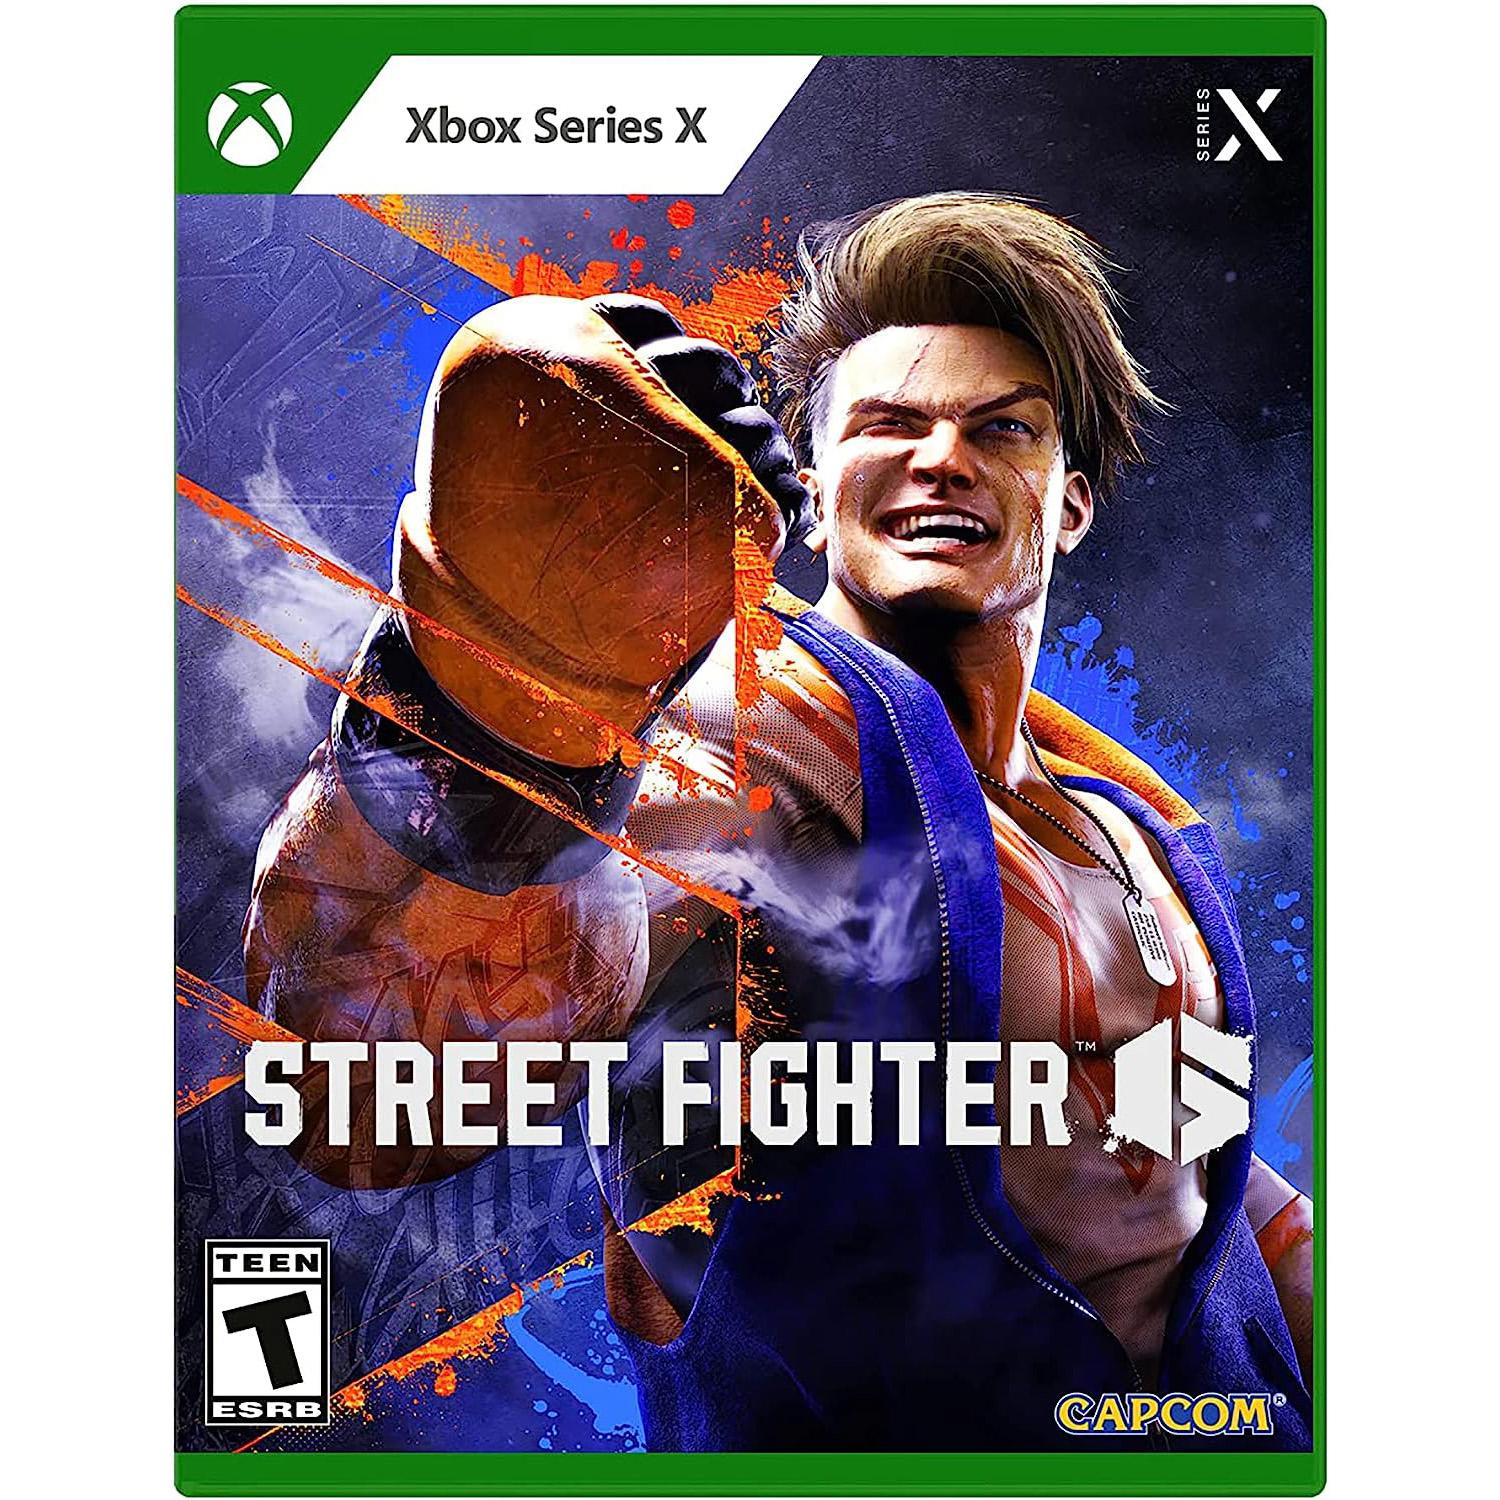 Street Fighter 6 for Xbox Series X for $49 Shipped